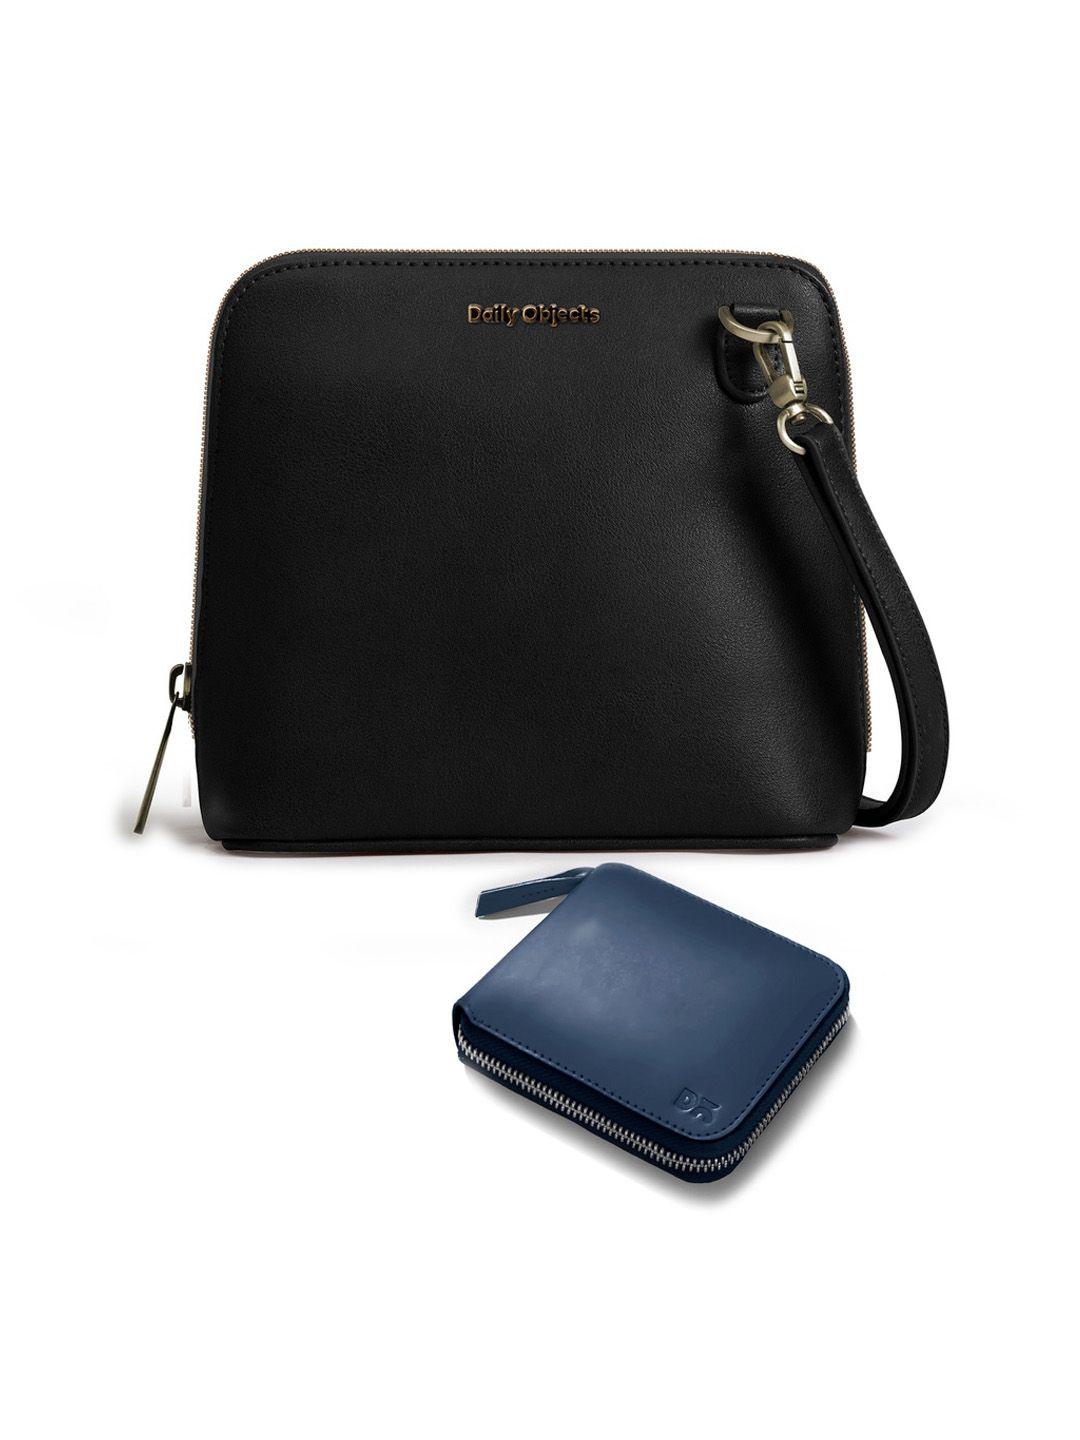 dailyobjects structured sling bag & zip wallet